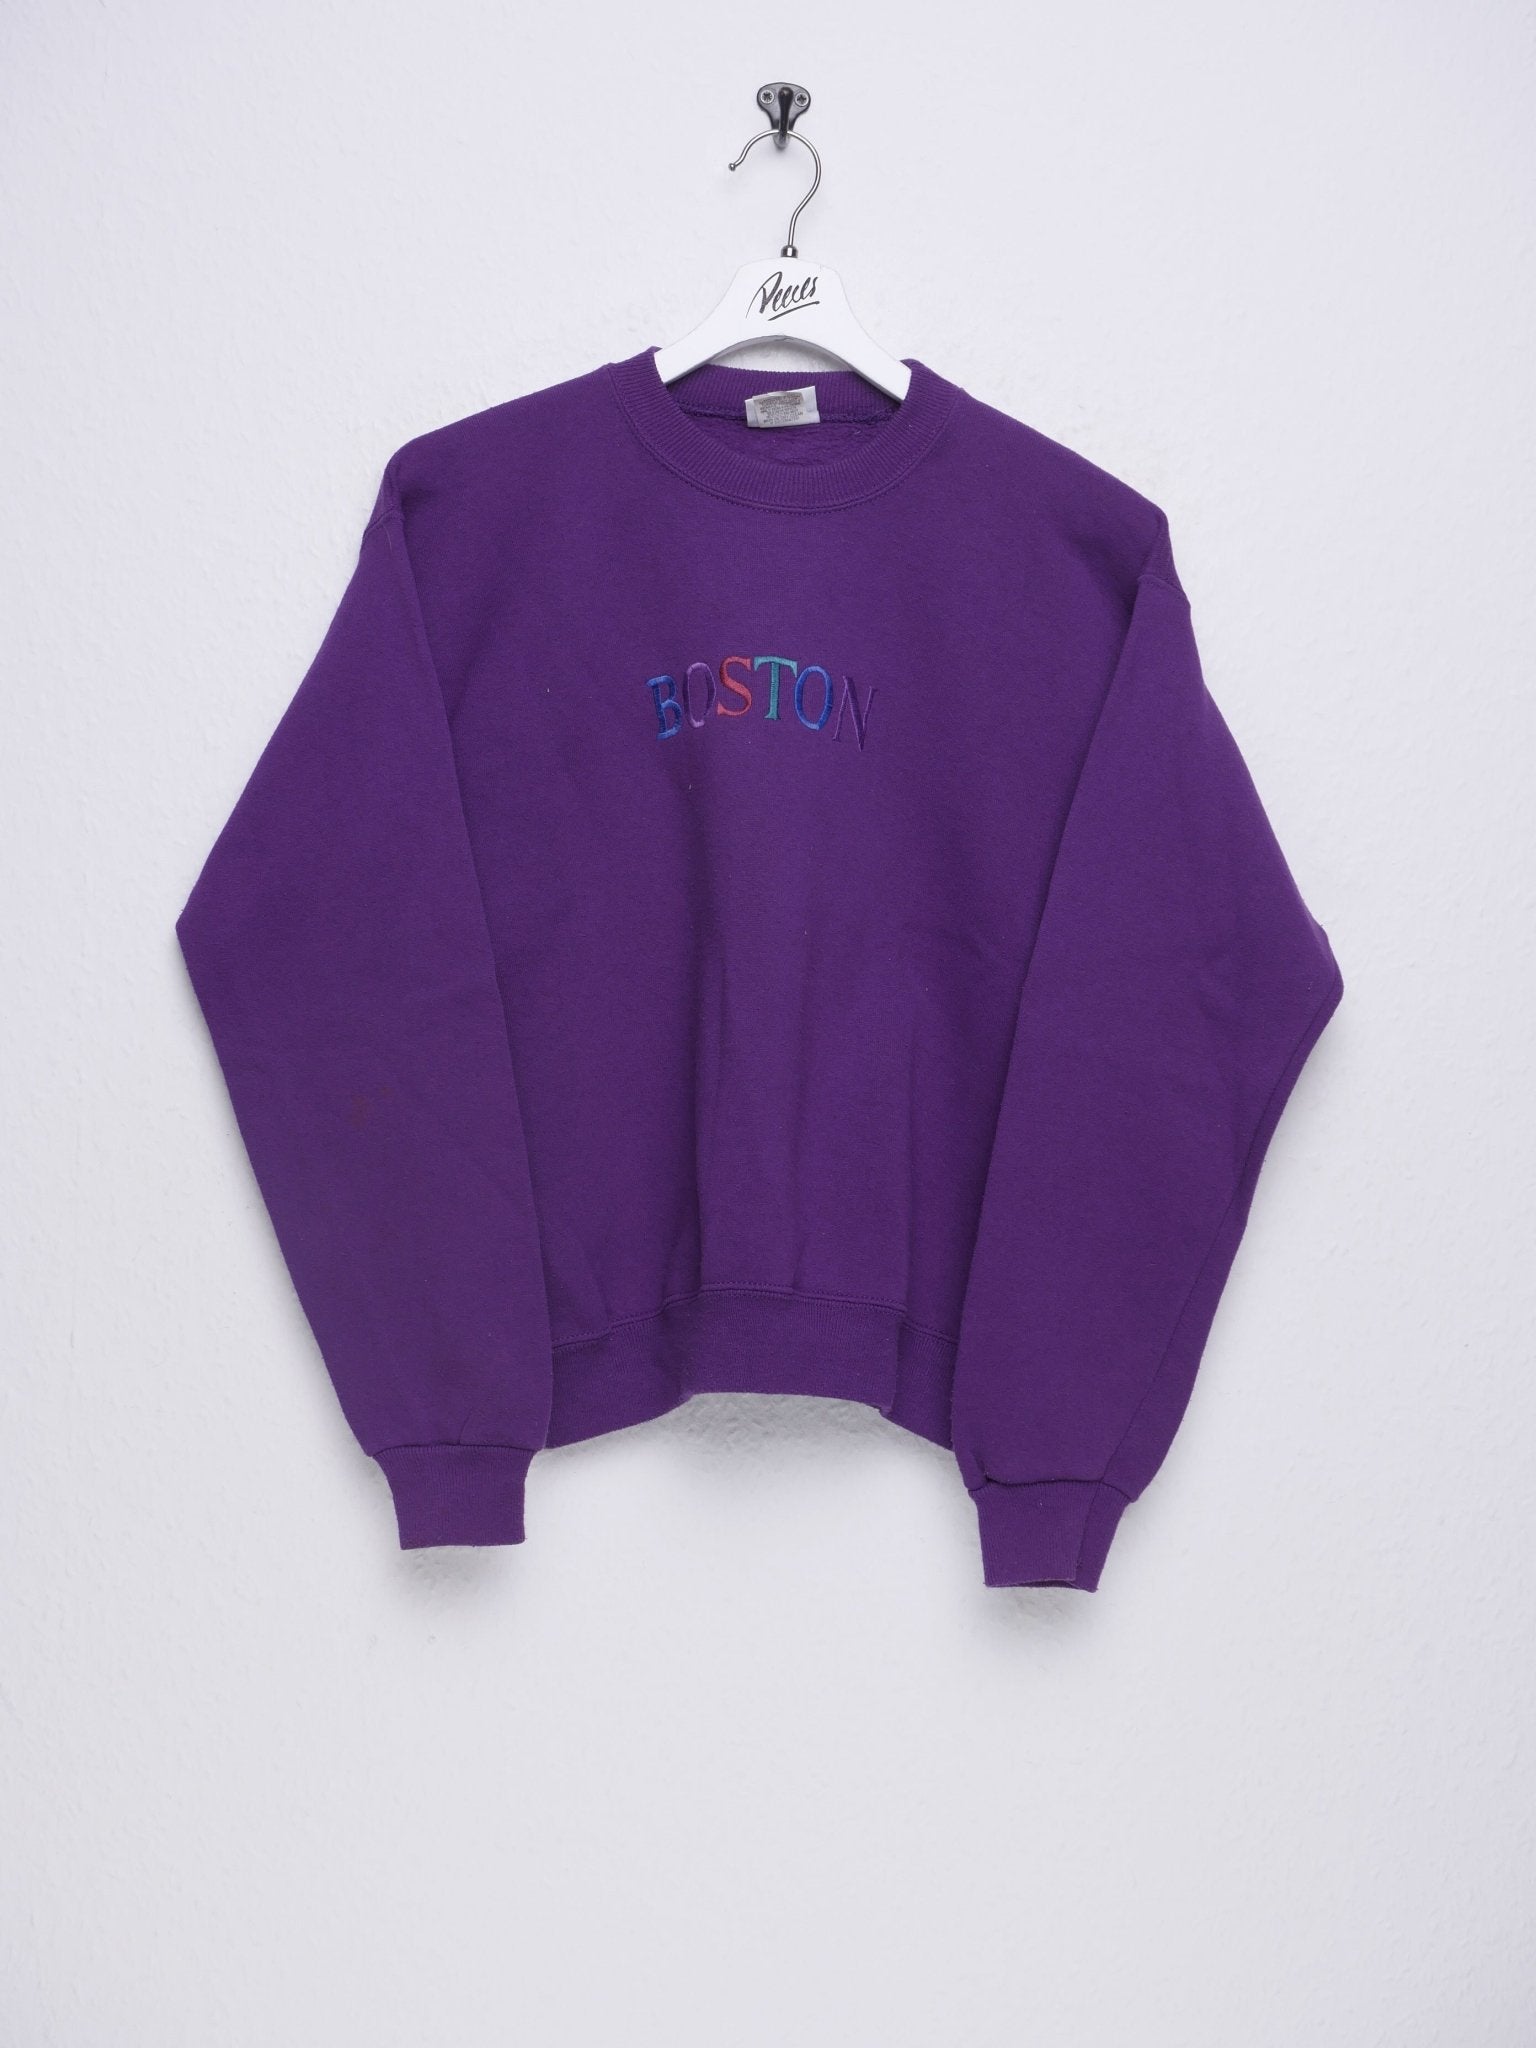 Boston embroidered Spellout purple Sweater - Peeces